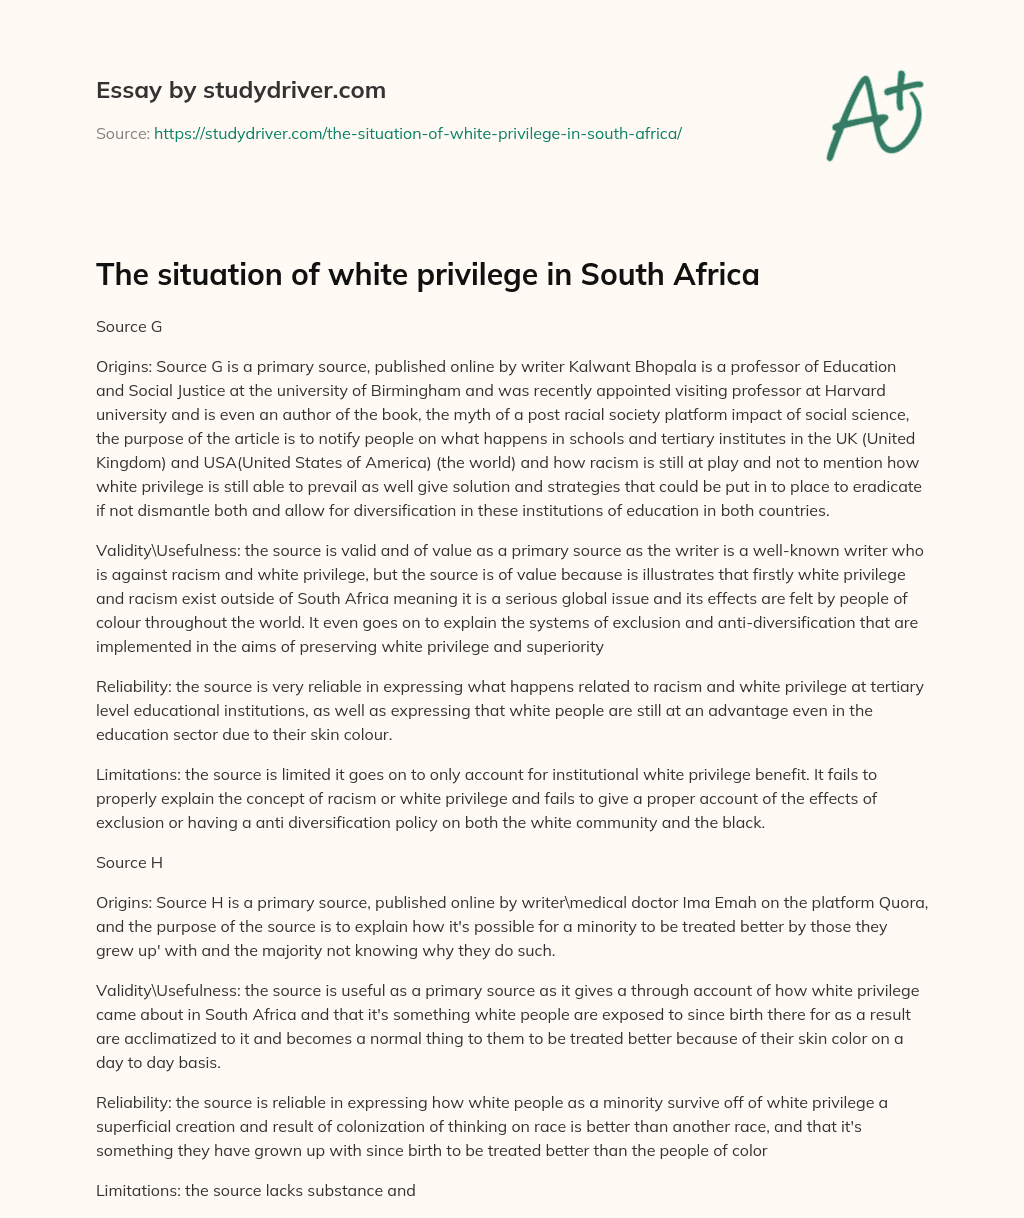 The Situation of White Privilege in South Africa essay